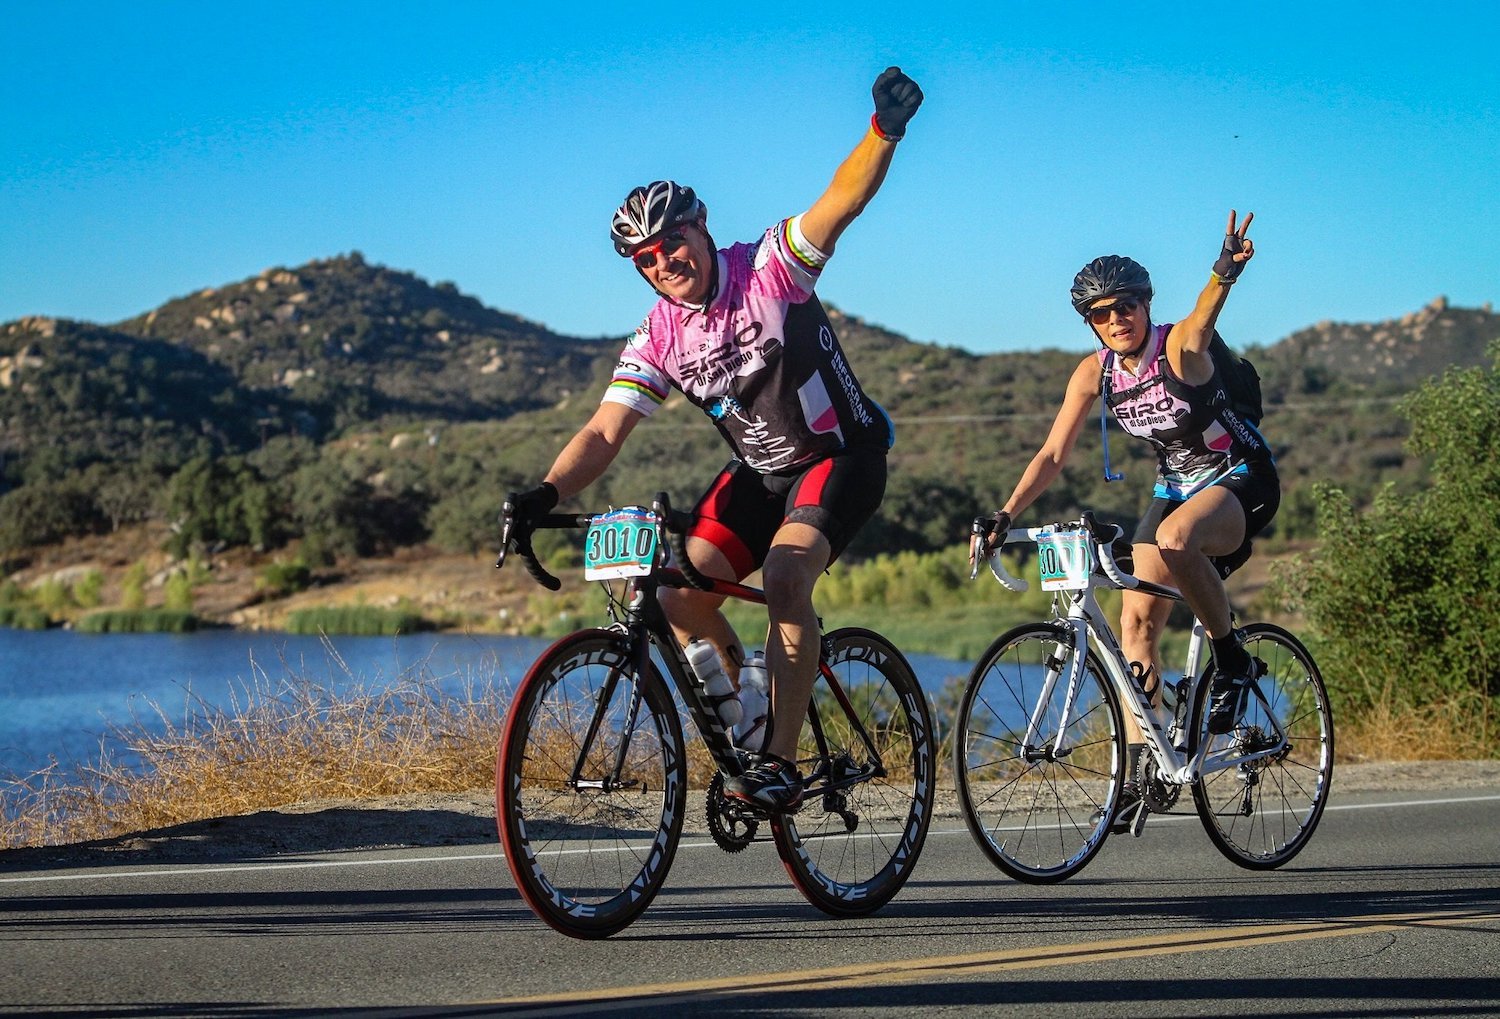 Things to do this weekend in San Diego including the Giro Di San Diego GranFondo Bike Race featuring two cyclists waving